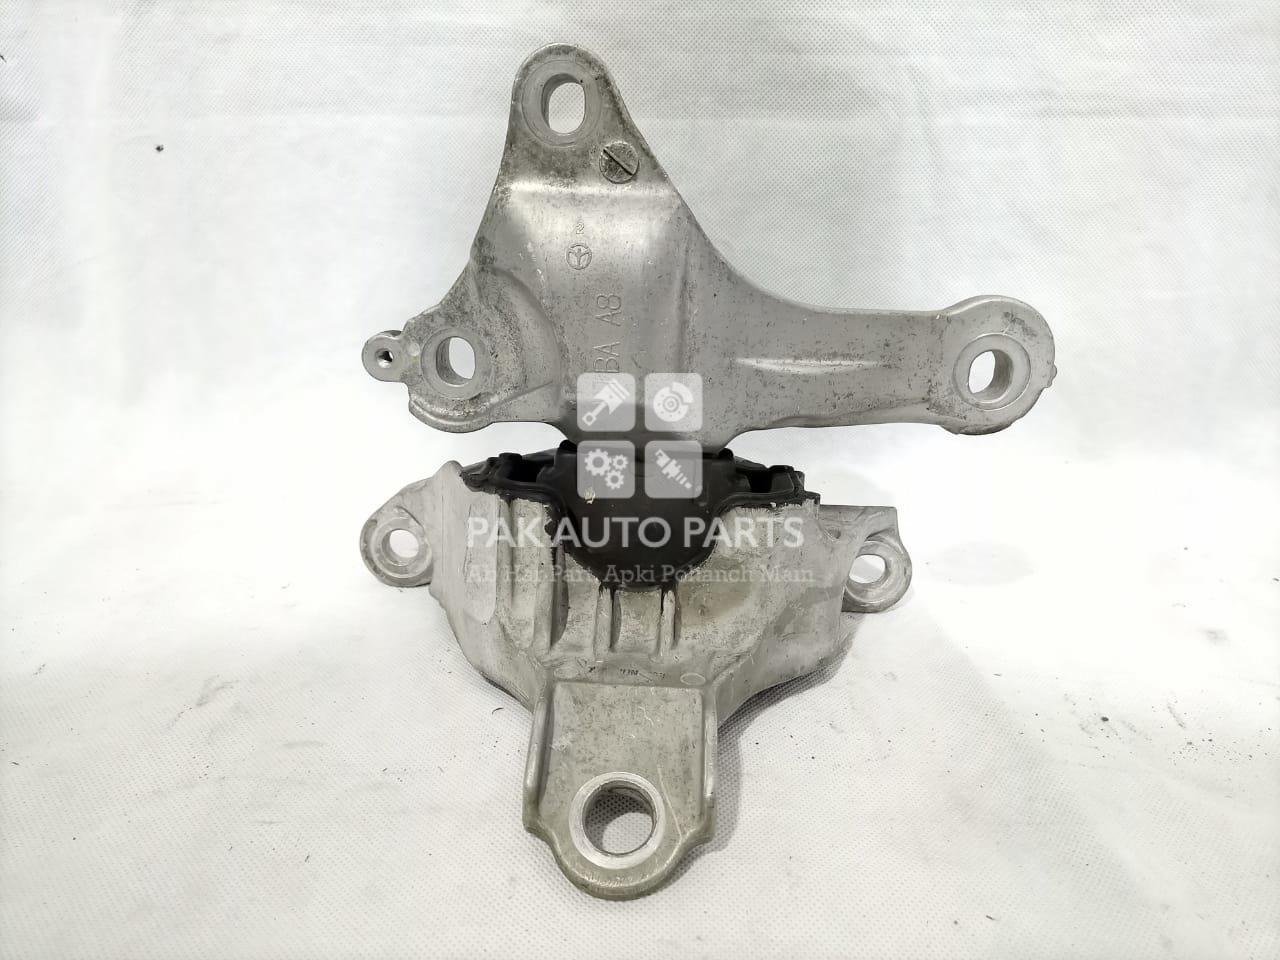 Picture of Kia Sportage 2019-21 Gear Mounting